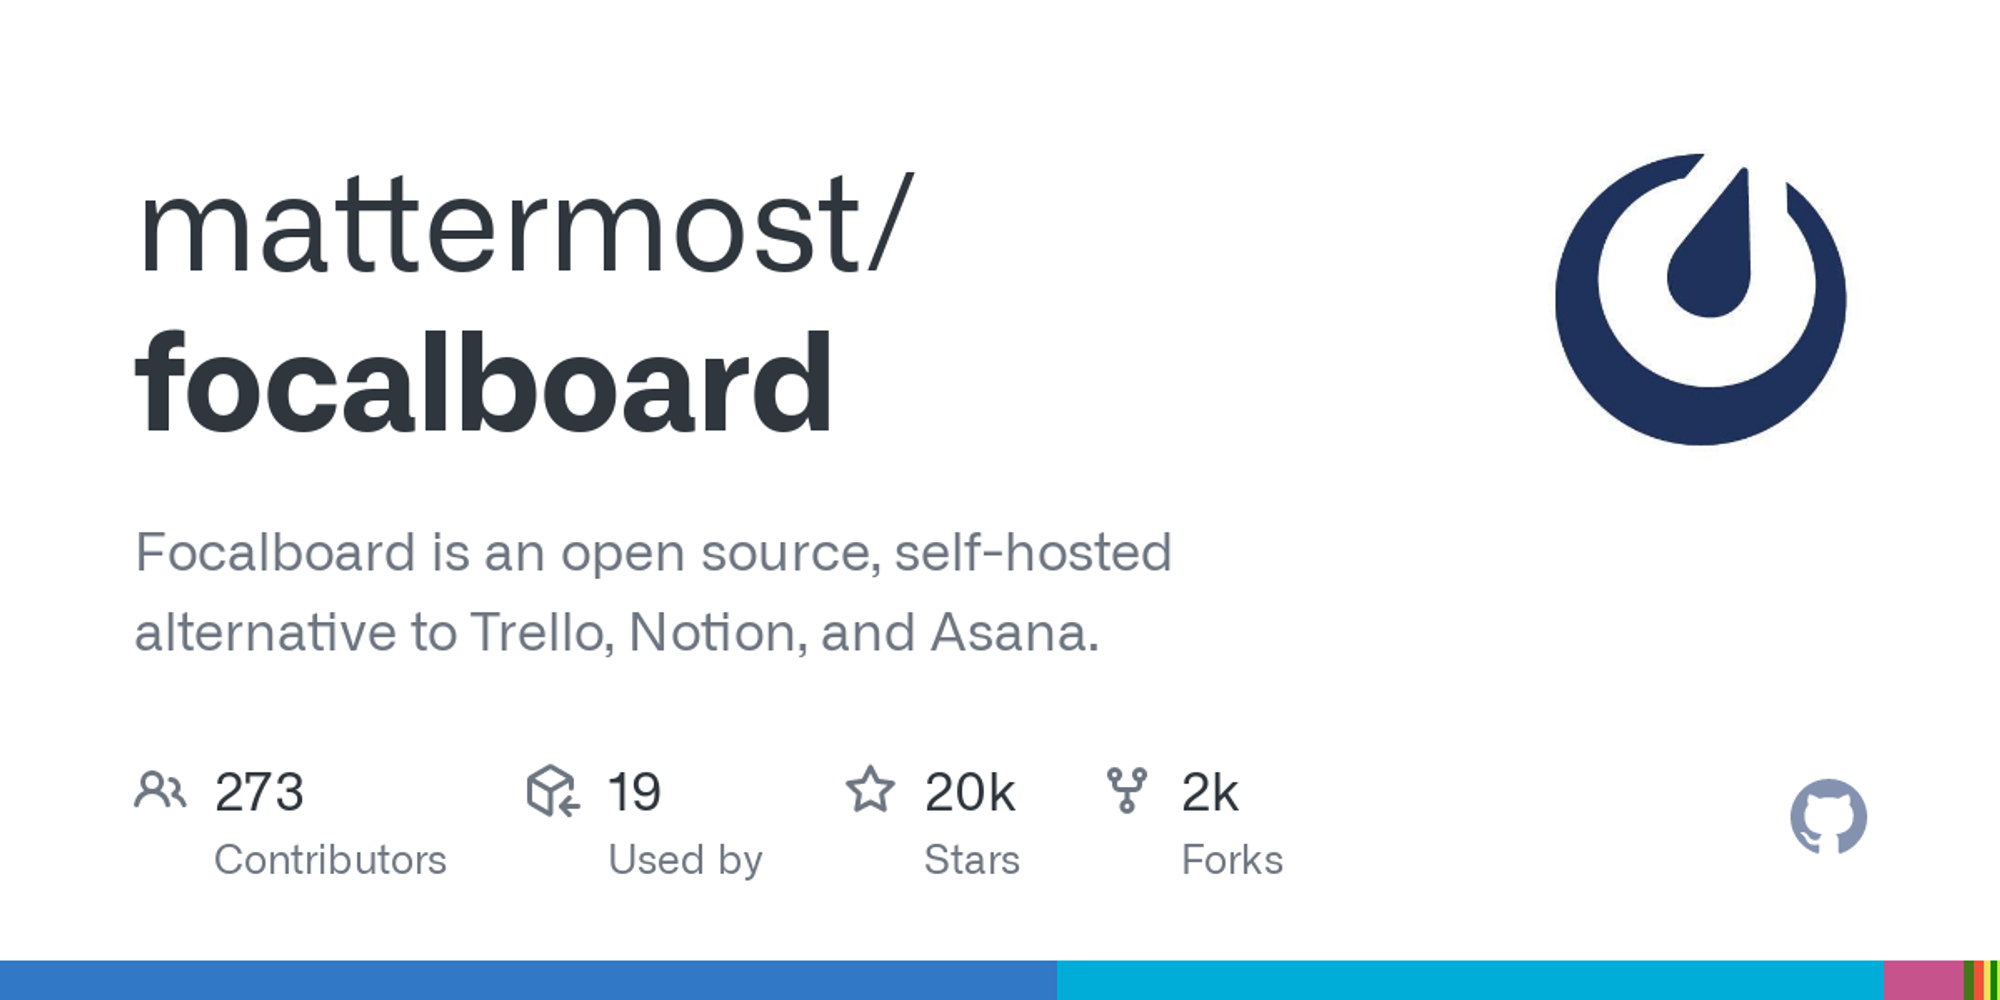 GitHub - mattermost/focalboard: Focalboard is an open source, self-hosted alternative to Trello, Notion, and Asana.